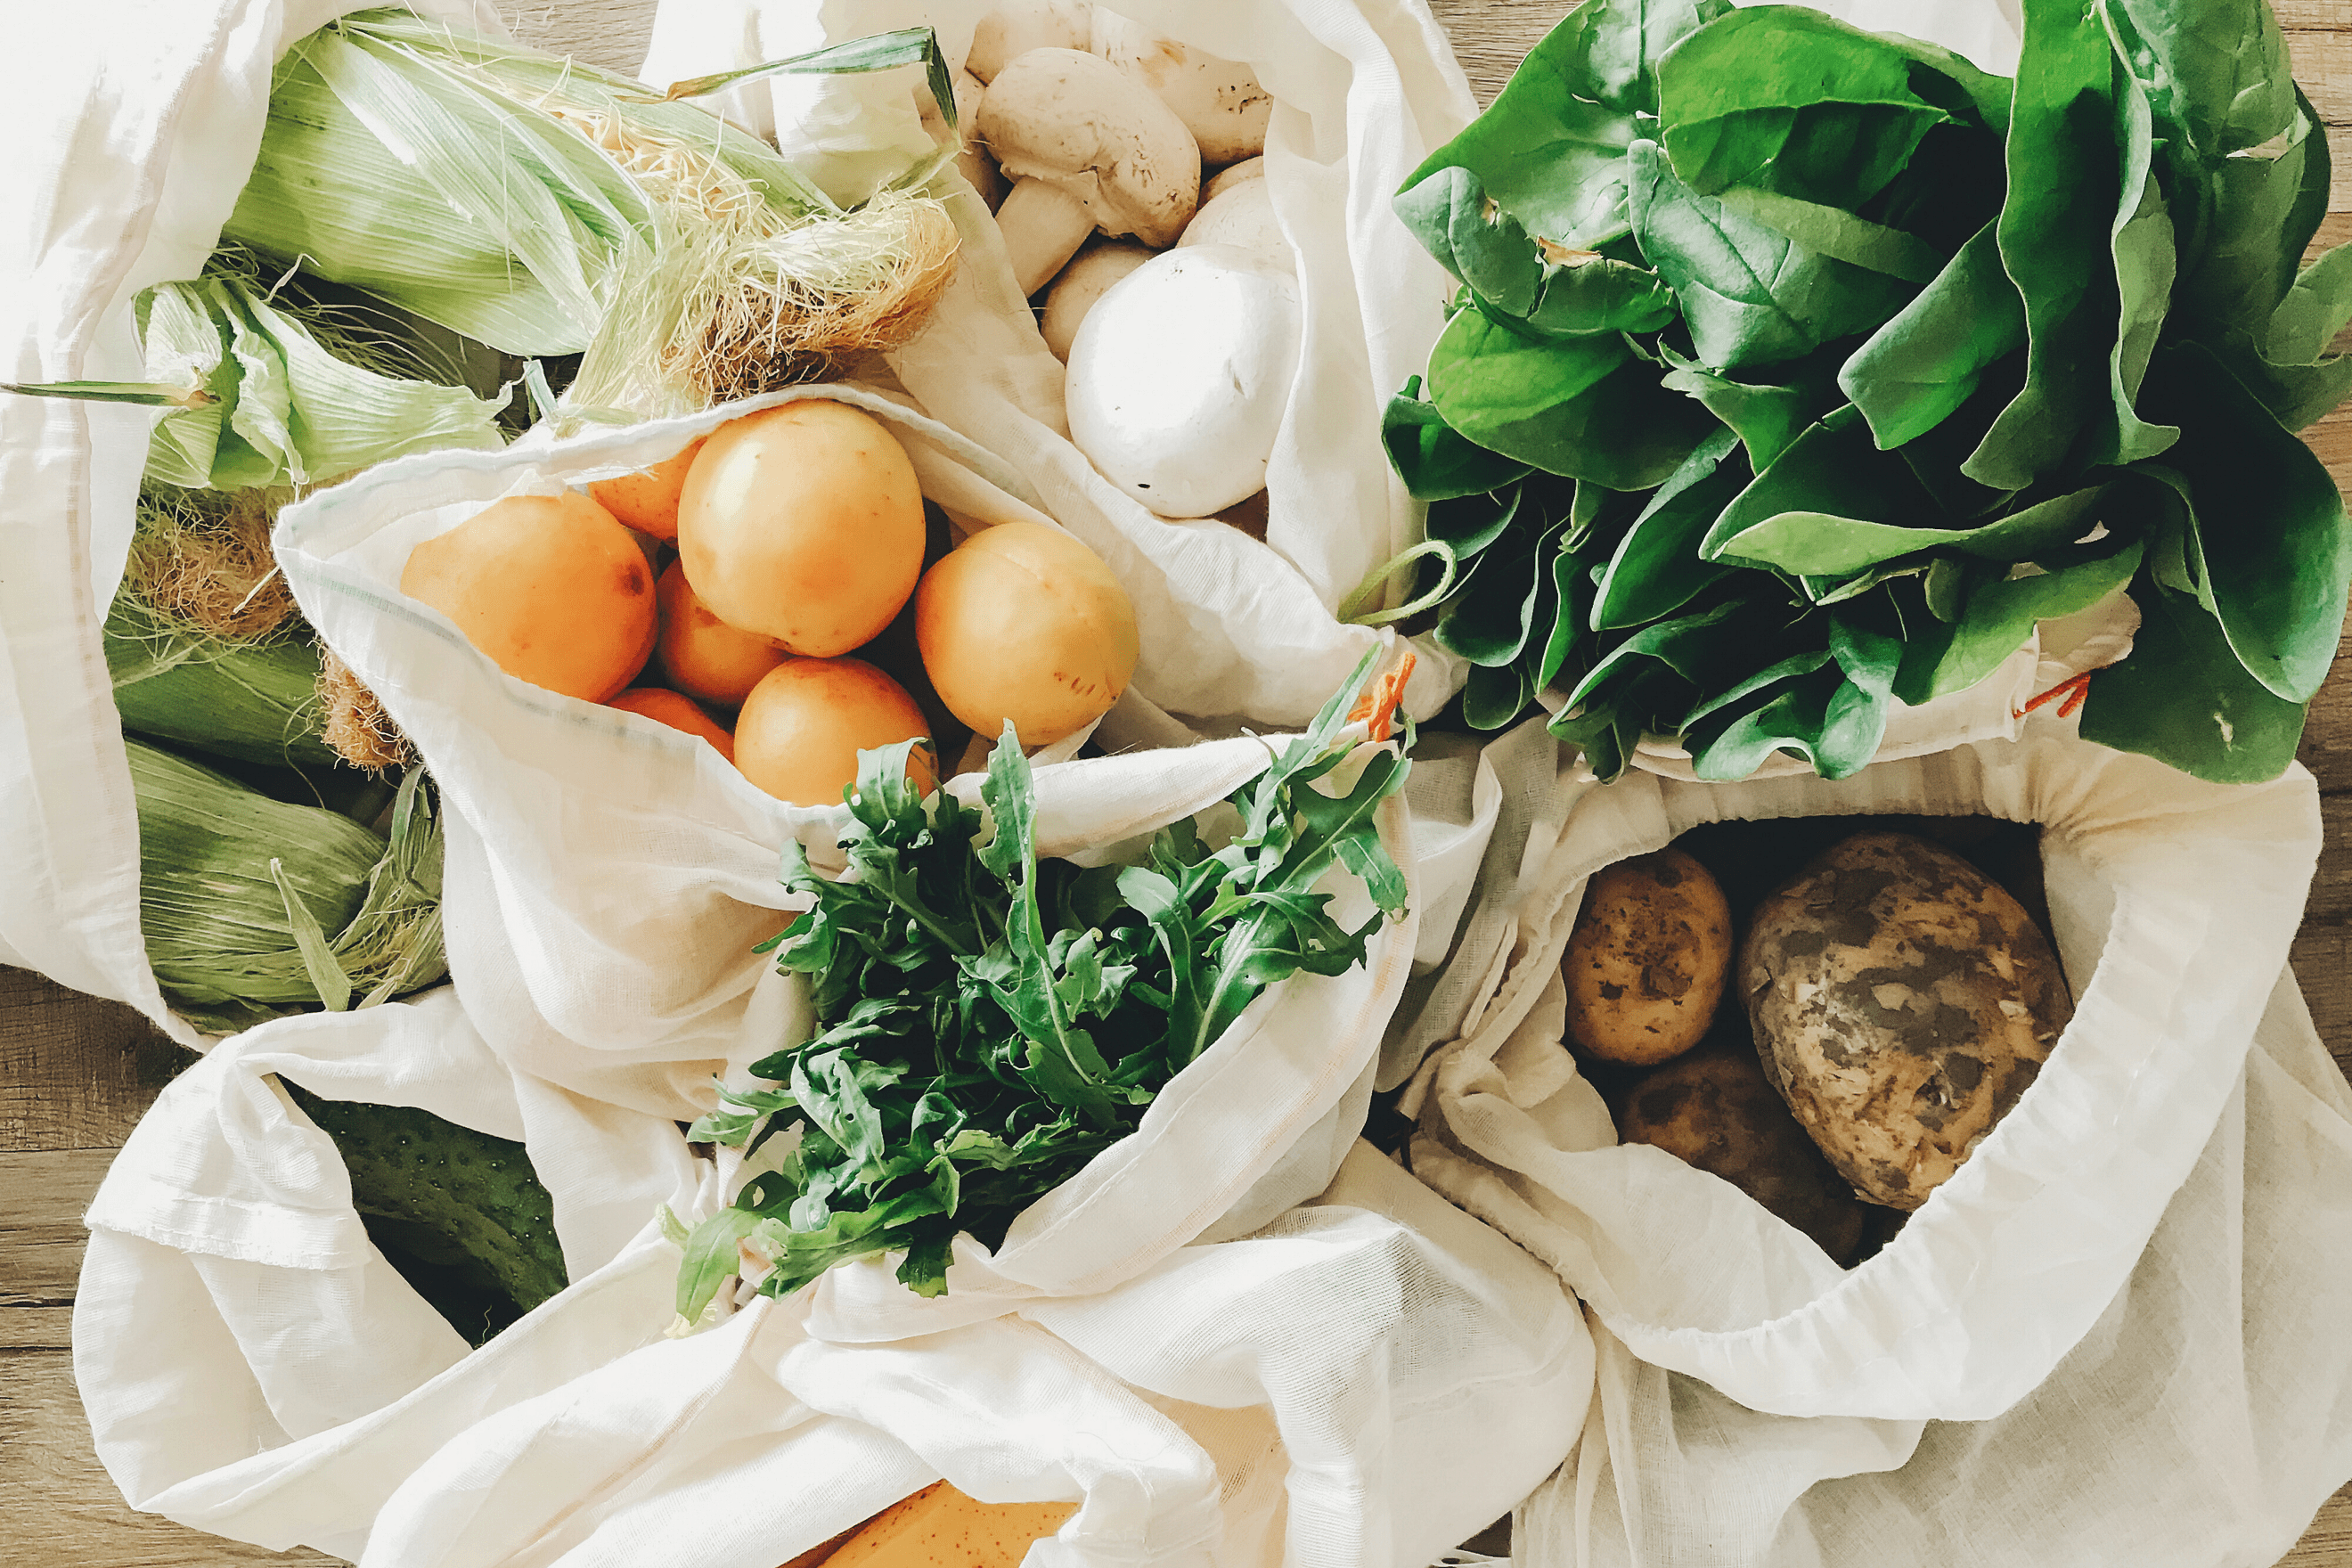 eco-friendly produce bags Reusable Zero waste vegetable produce bags Sustainable shopping produce bags.